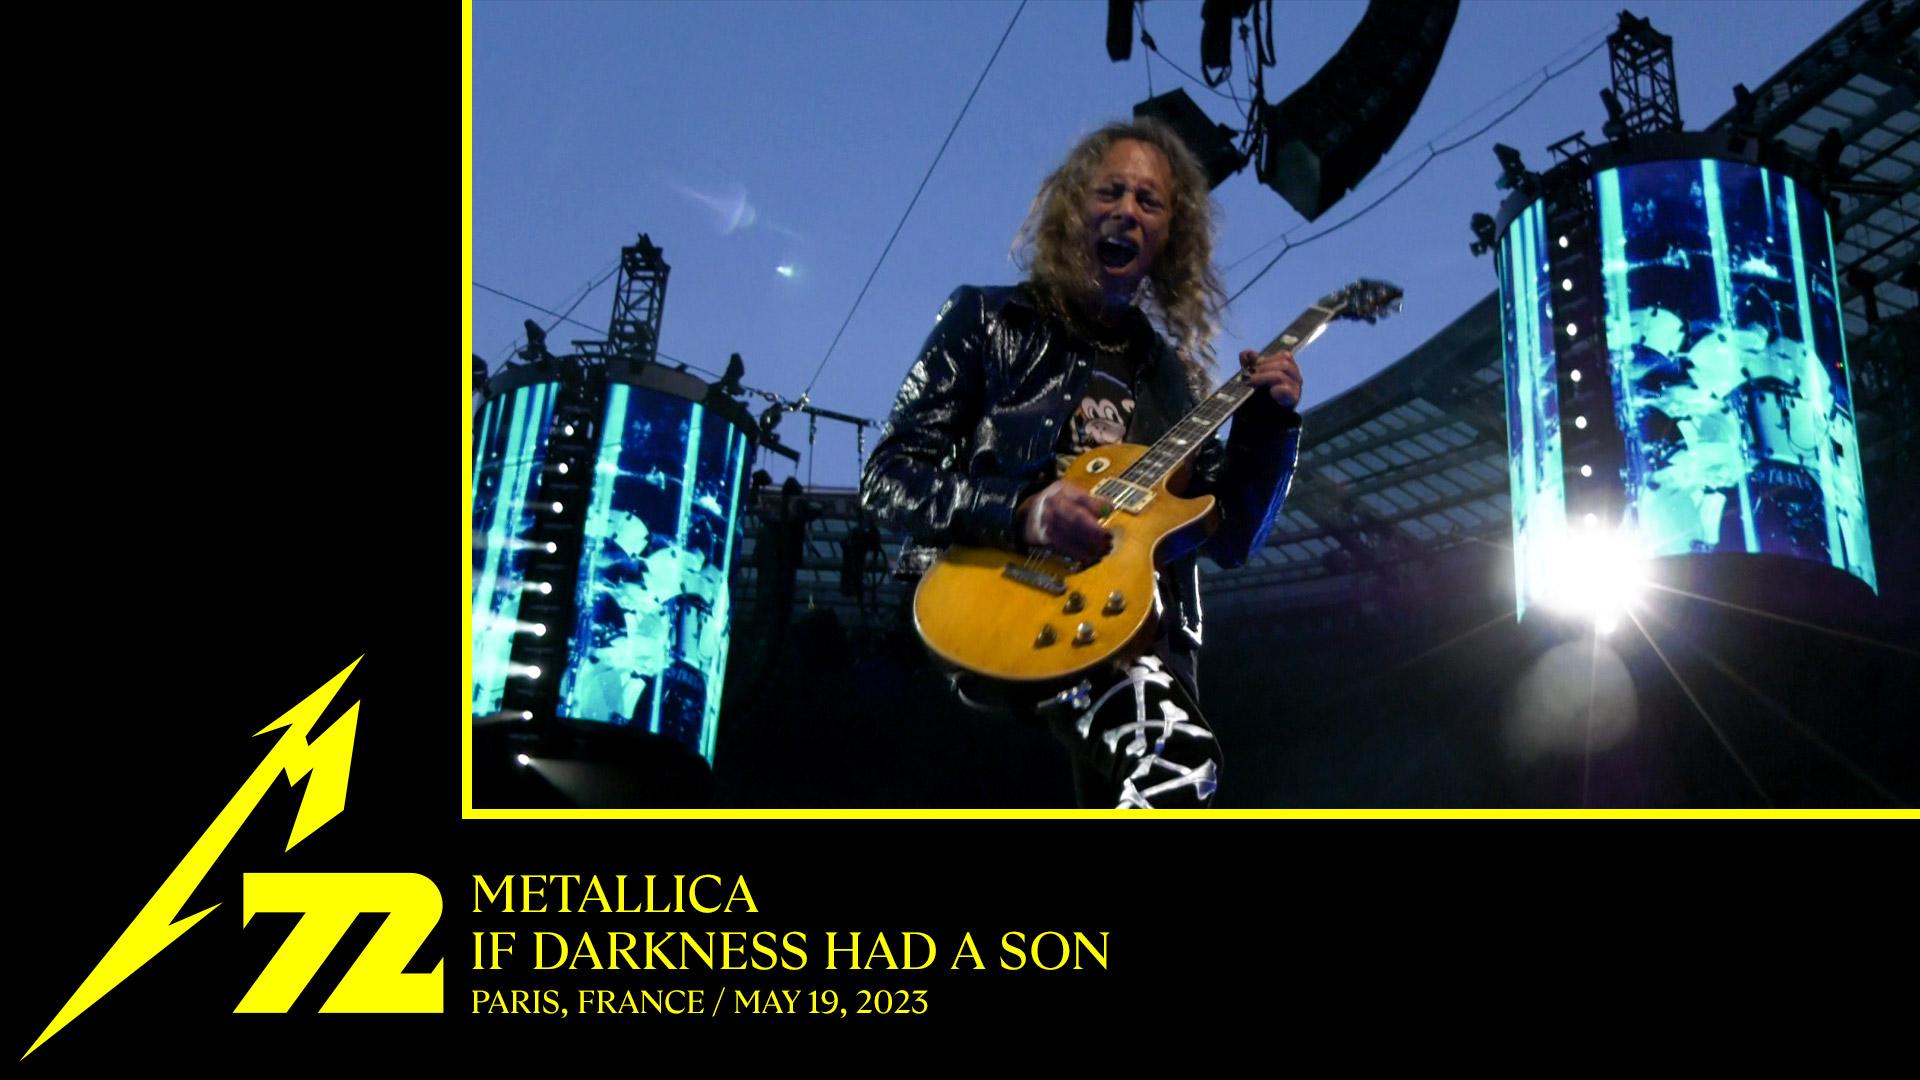 If Darkness Had a Son (Paris, France - May 19, 2023)